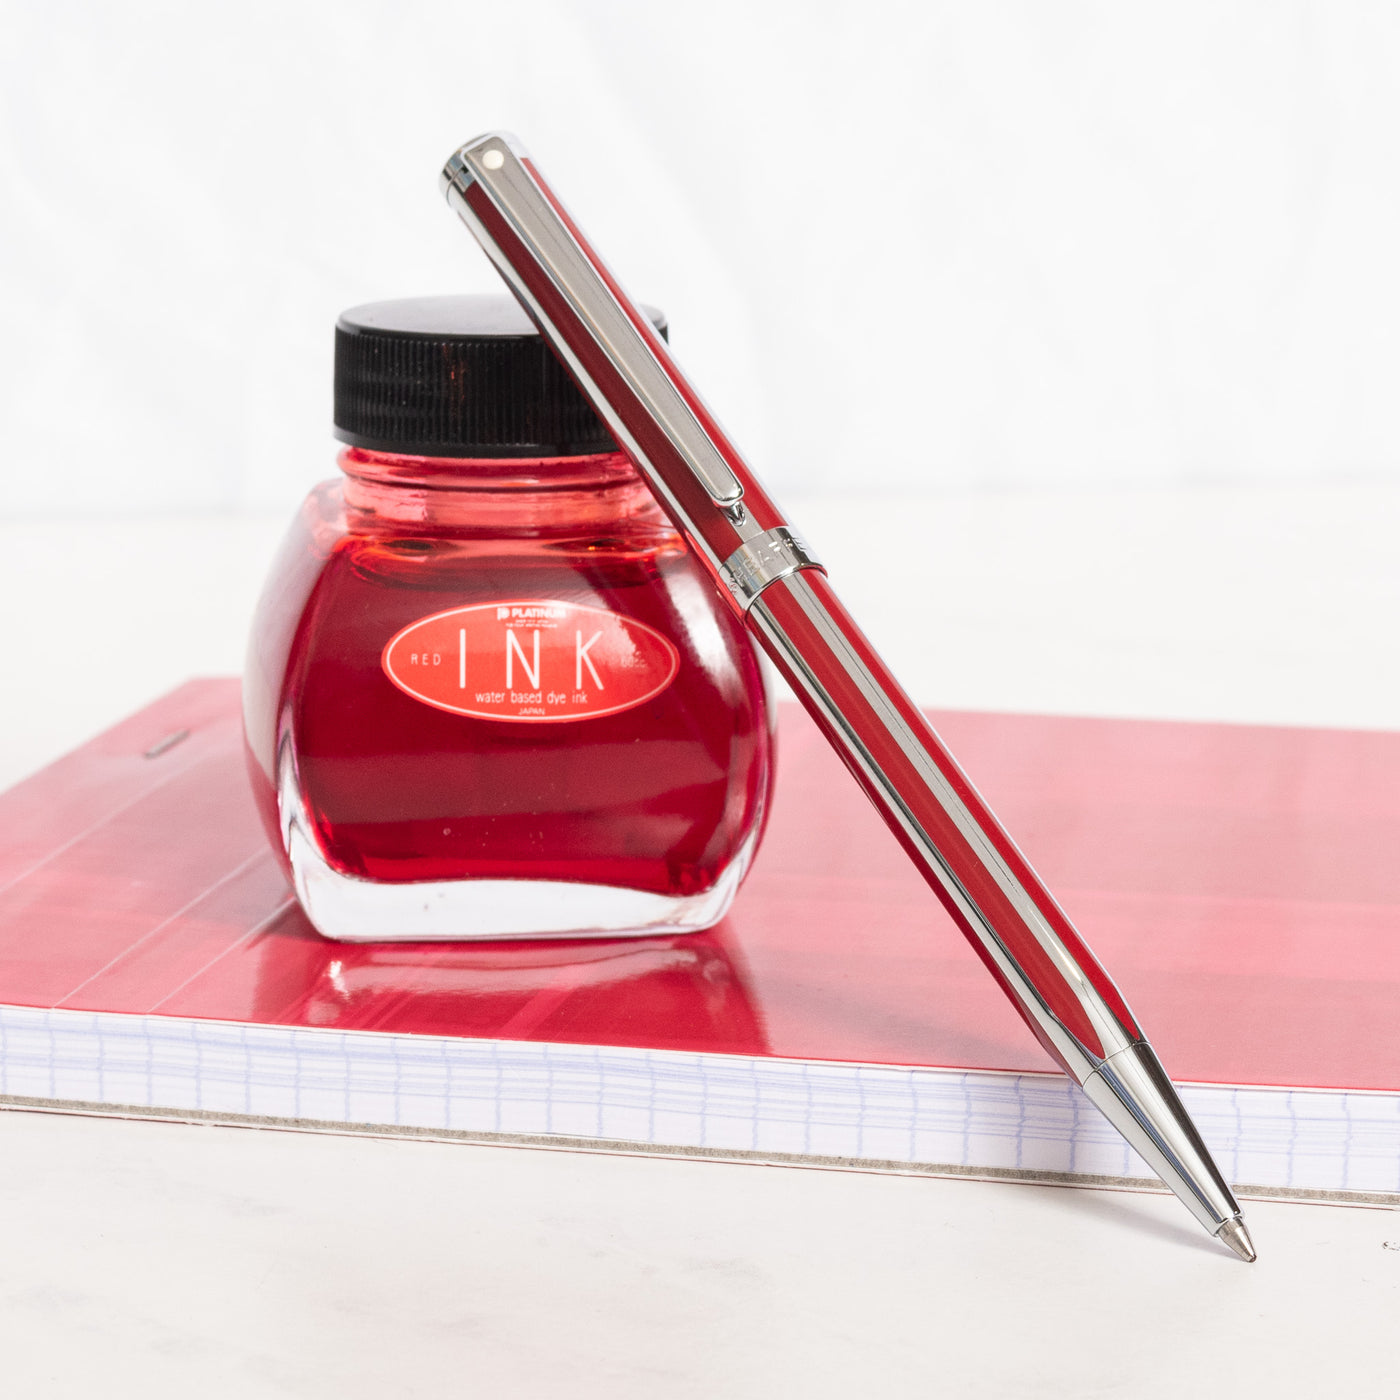 Sheaffer Intensity Ballpoint Pen in Red Stripe - Glossy Lacquer, Chrome Stripes, Polished Trim